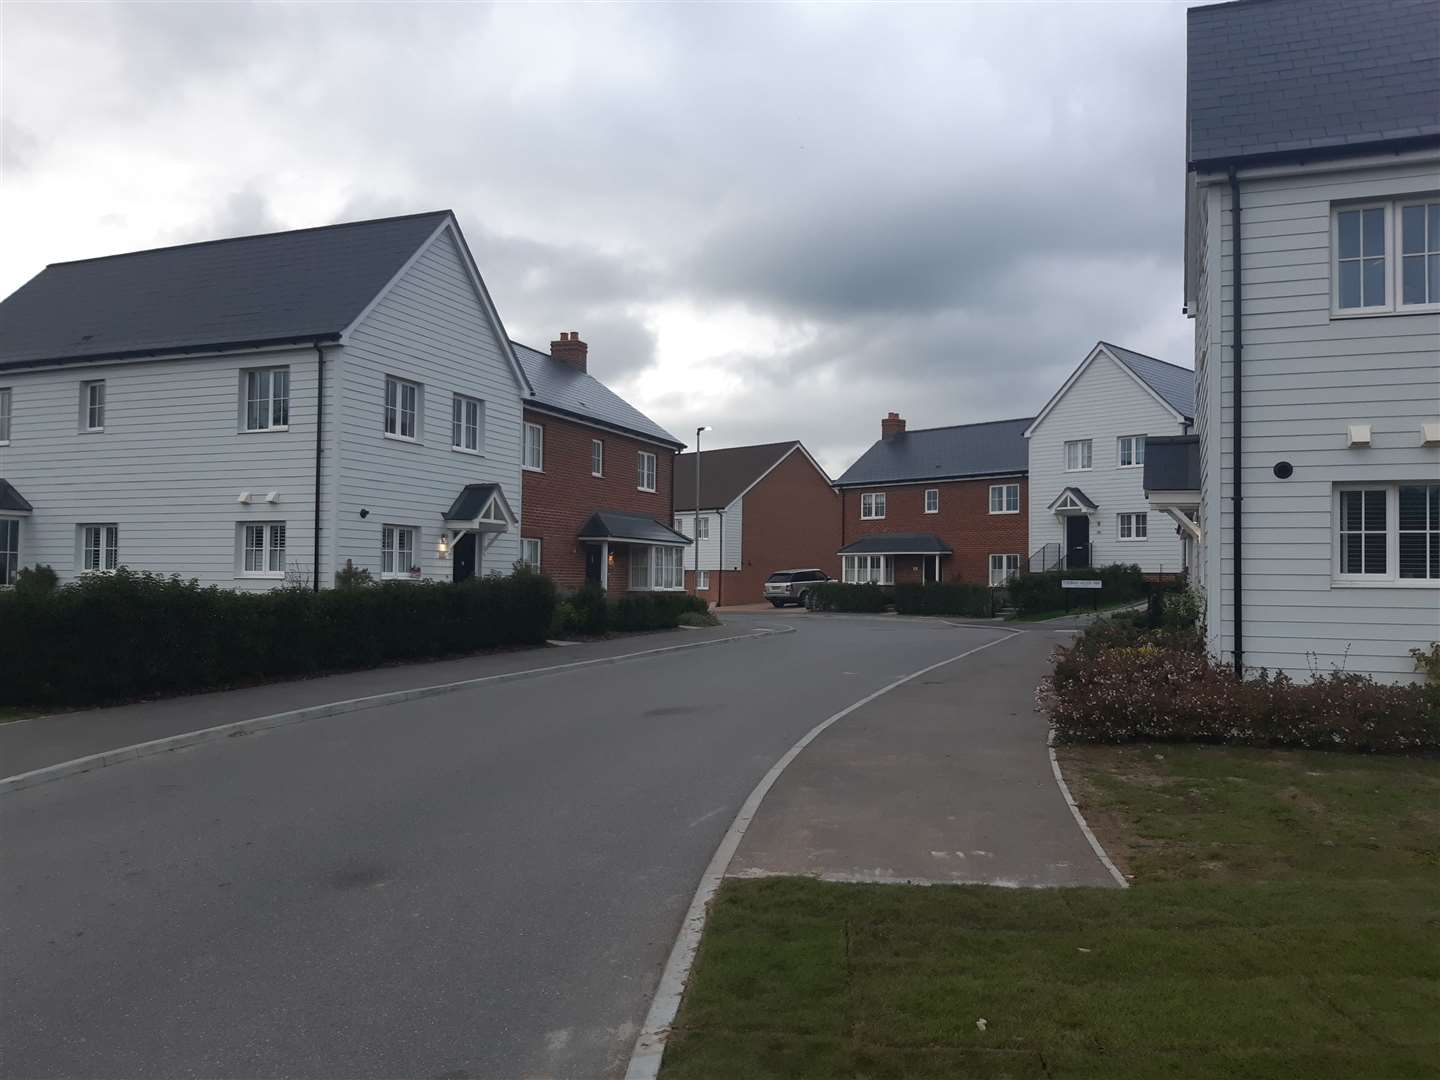 Houses on the new Dandara Sycamores estate